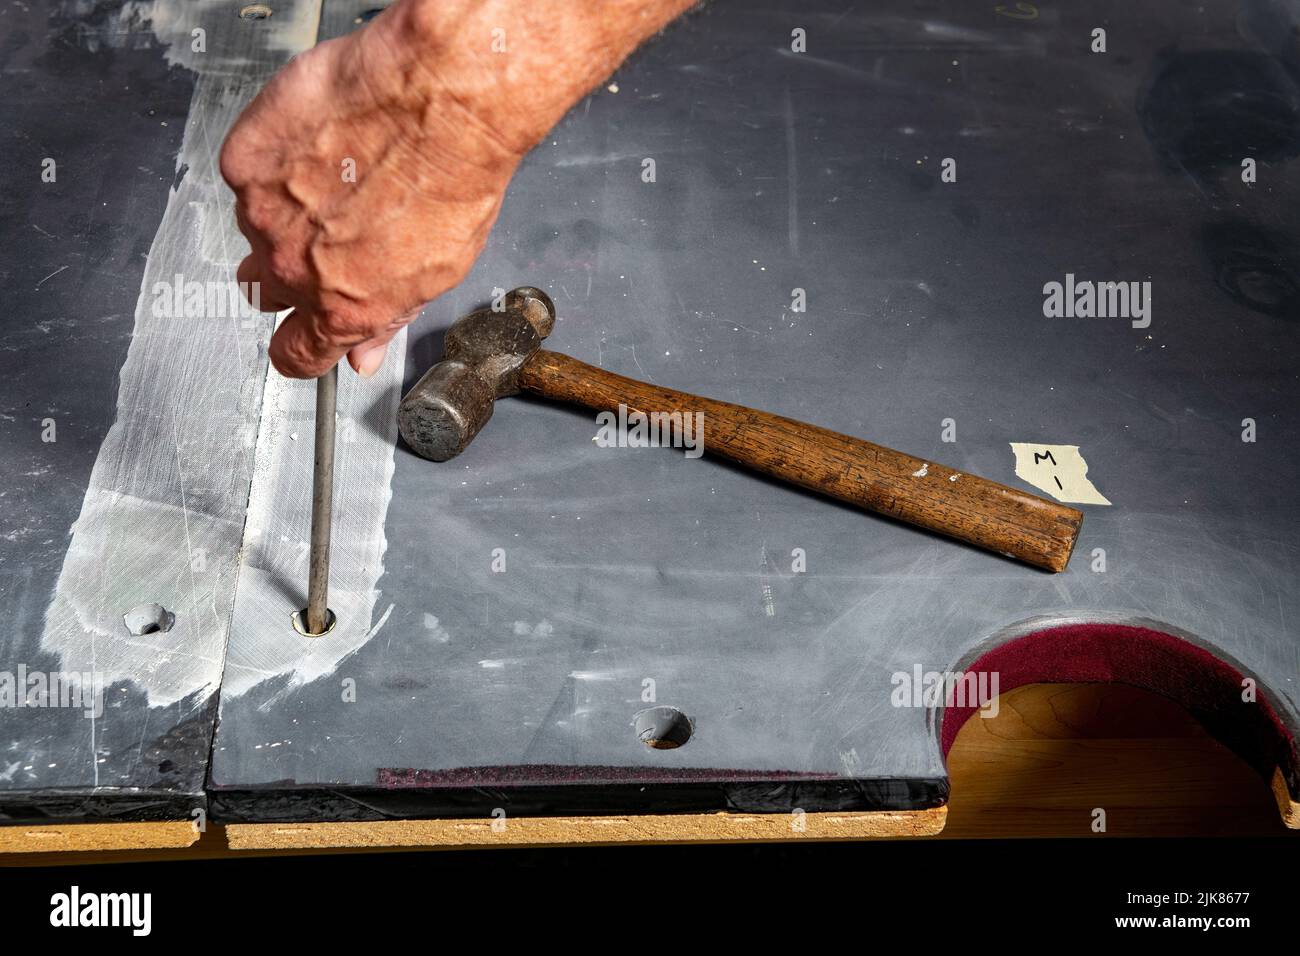 Bare naked pool table slate screwing slate panels in Stock Photo